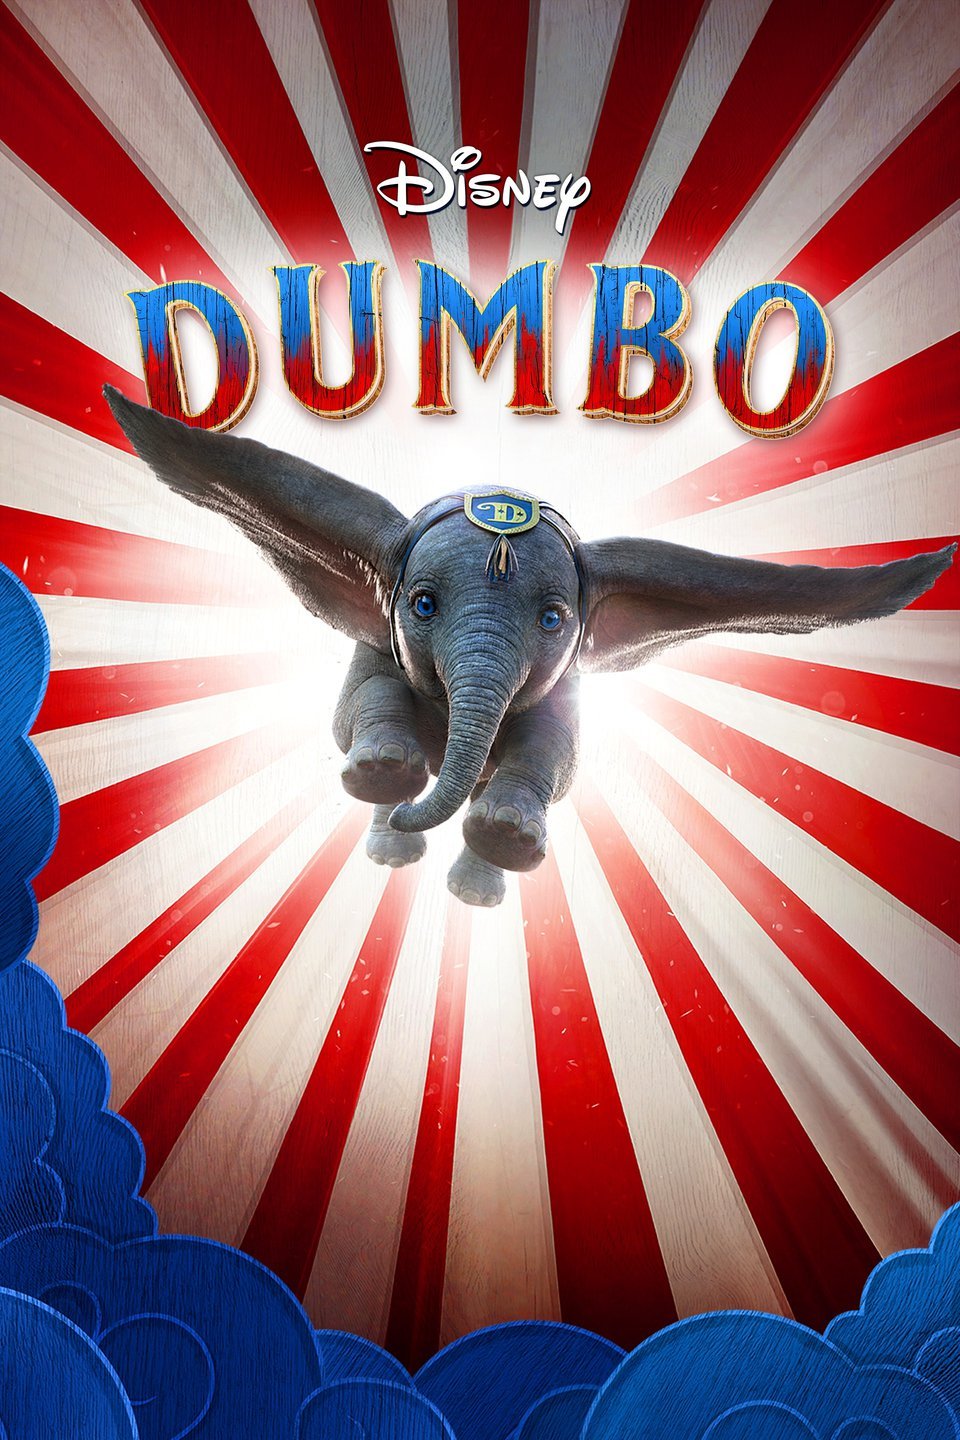 The cover of Disney's Dumbo movie with a flying elephant in front of a circus background